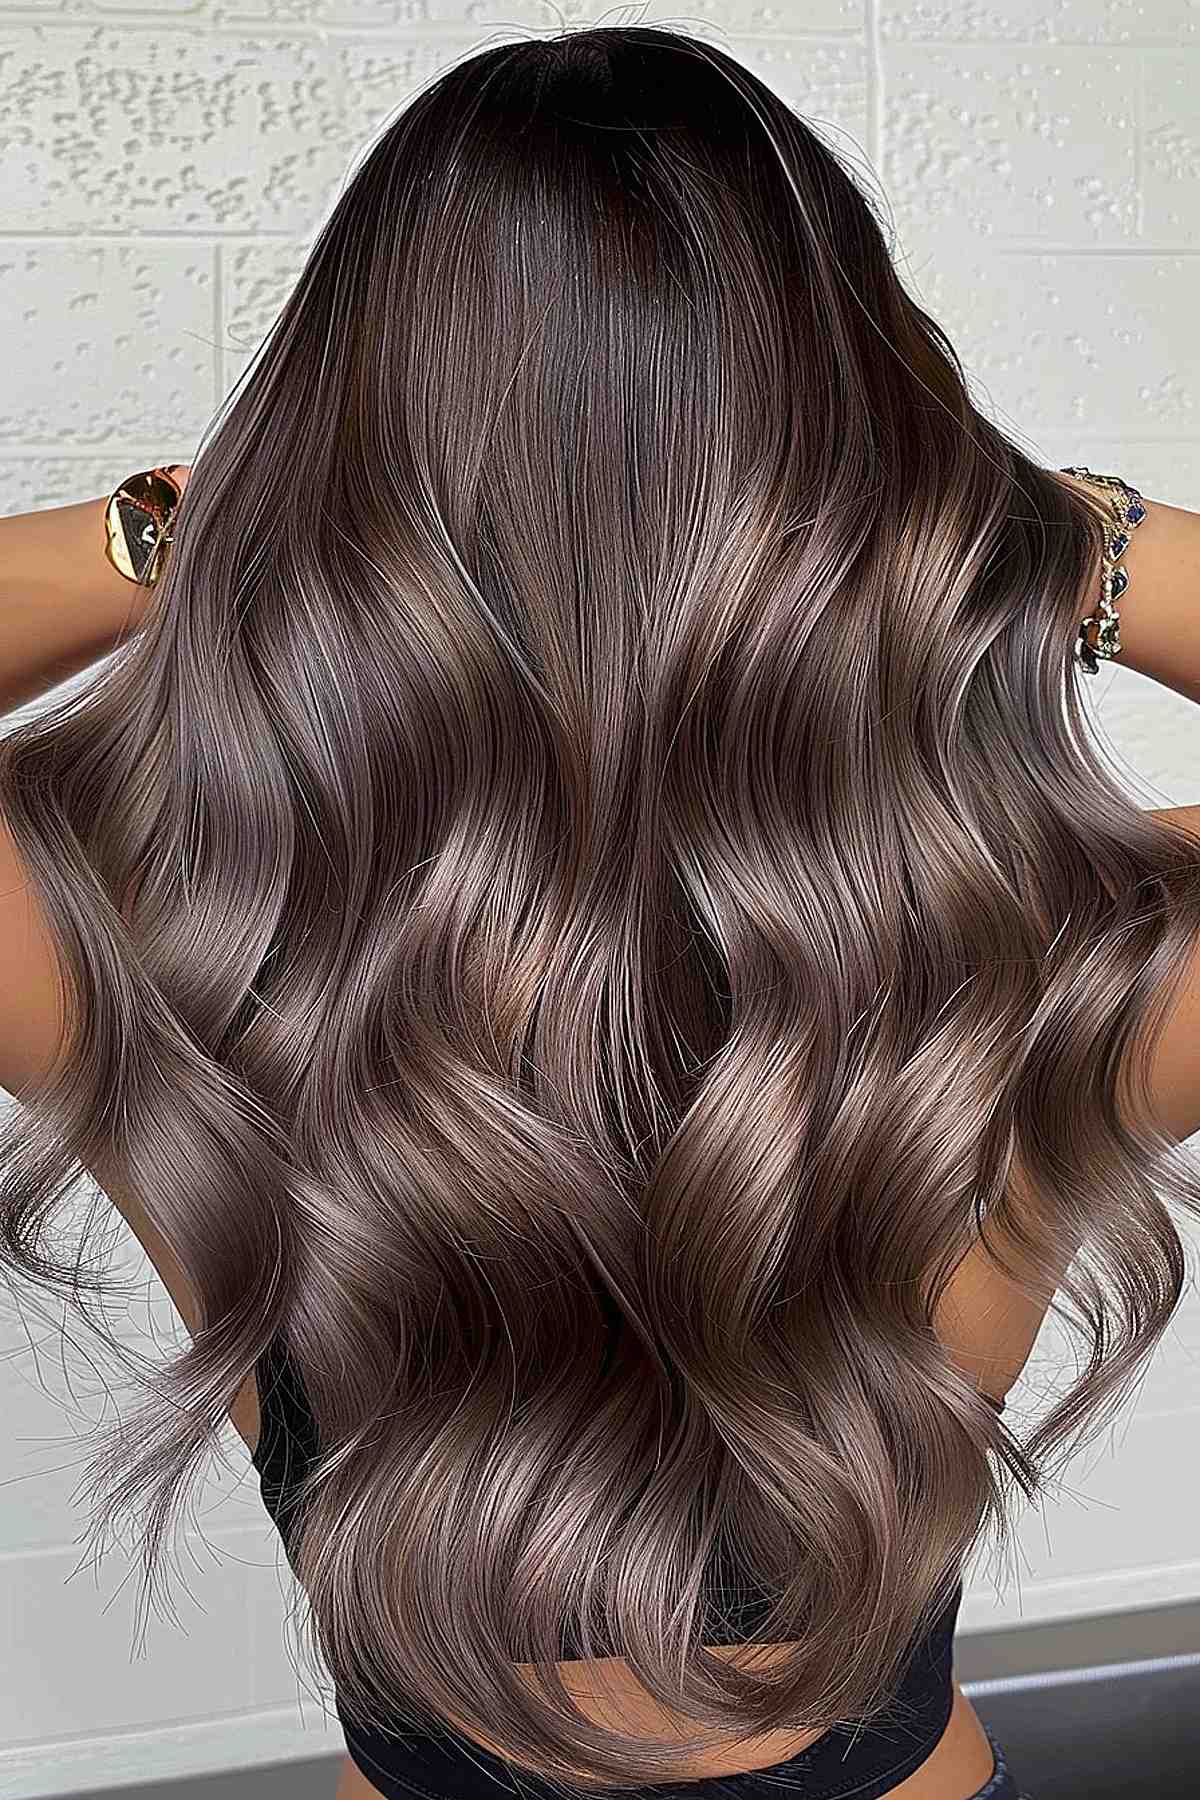 Long, thick waves in a gradient of mushroom brown tones, showing depth and subtle elegance in hair color.